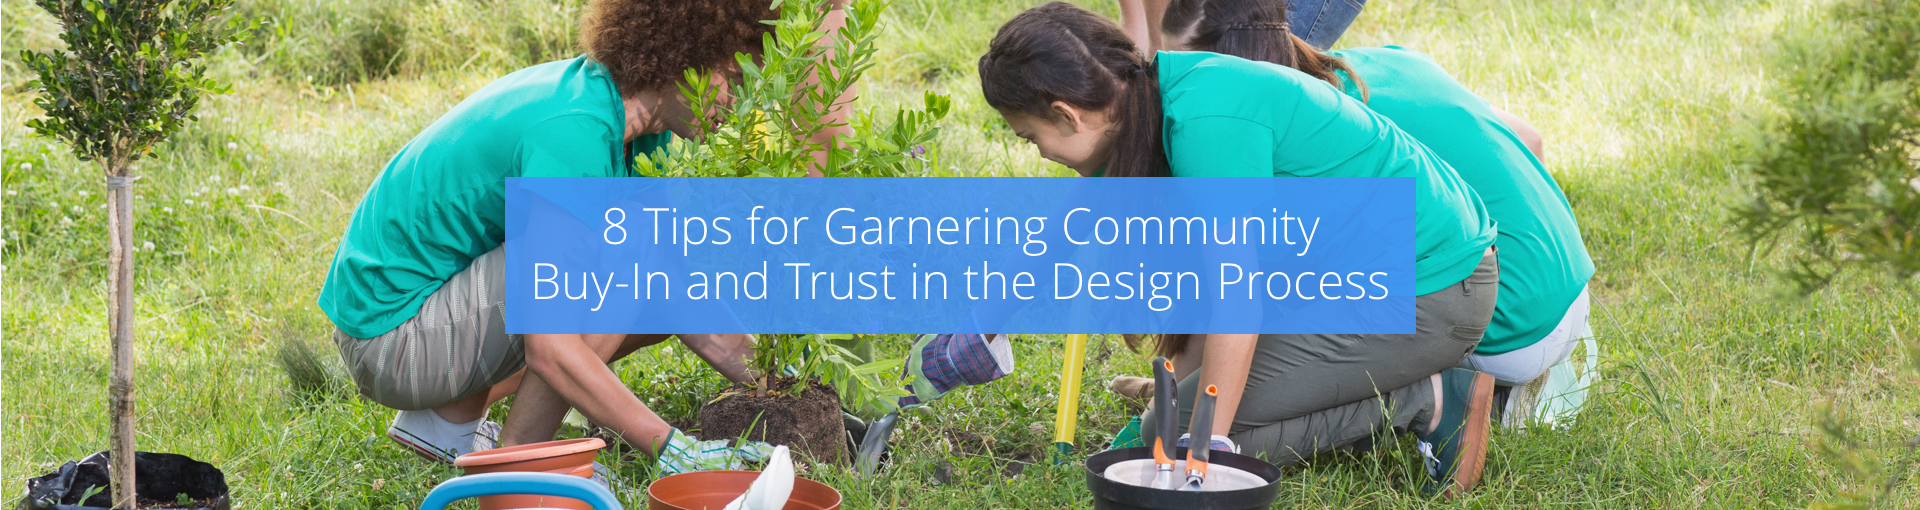 8 Tips for Garnering Community Buy-In and Trust in the Design Process Featured Image